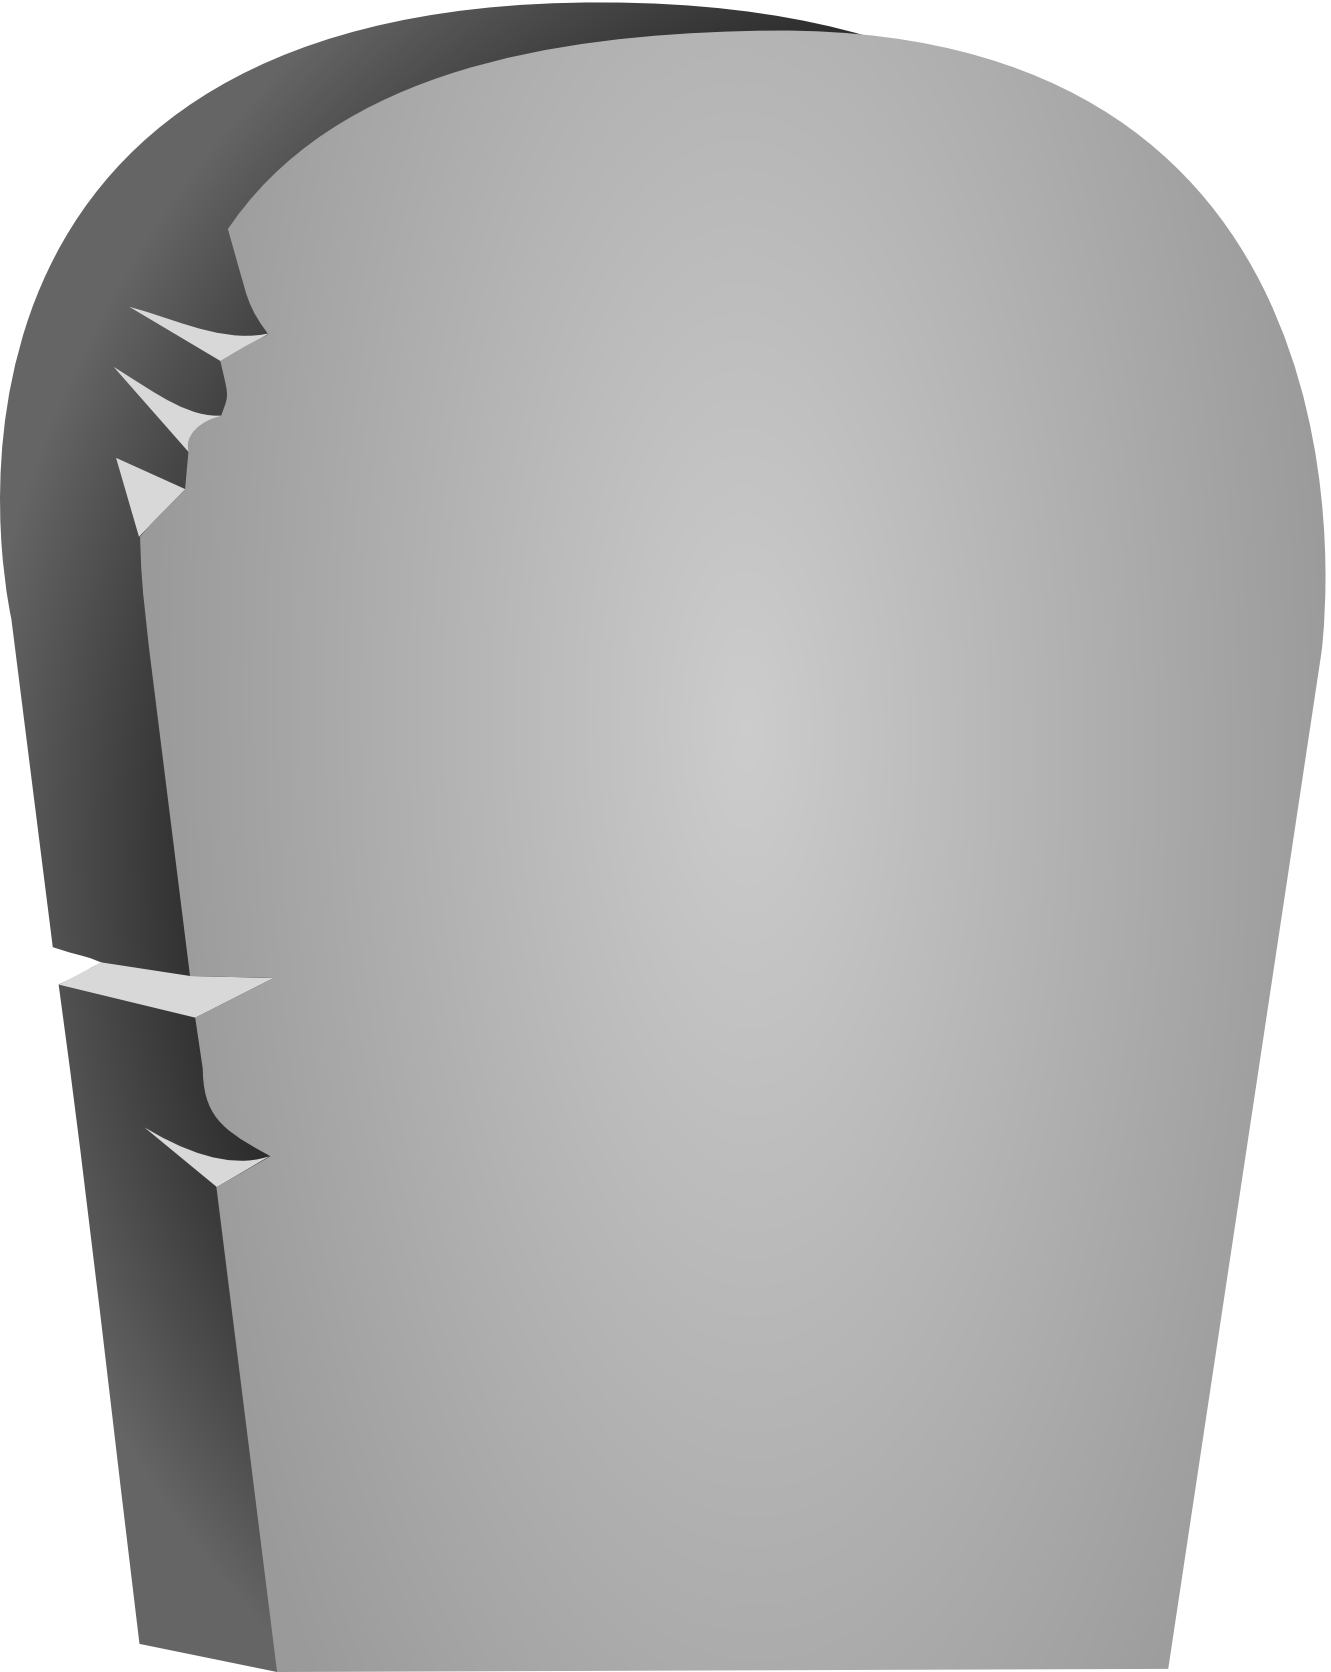 Tombstone Clip Art - Clipart library